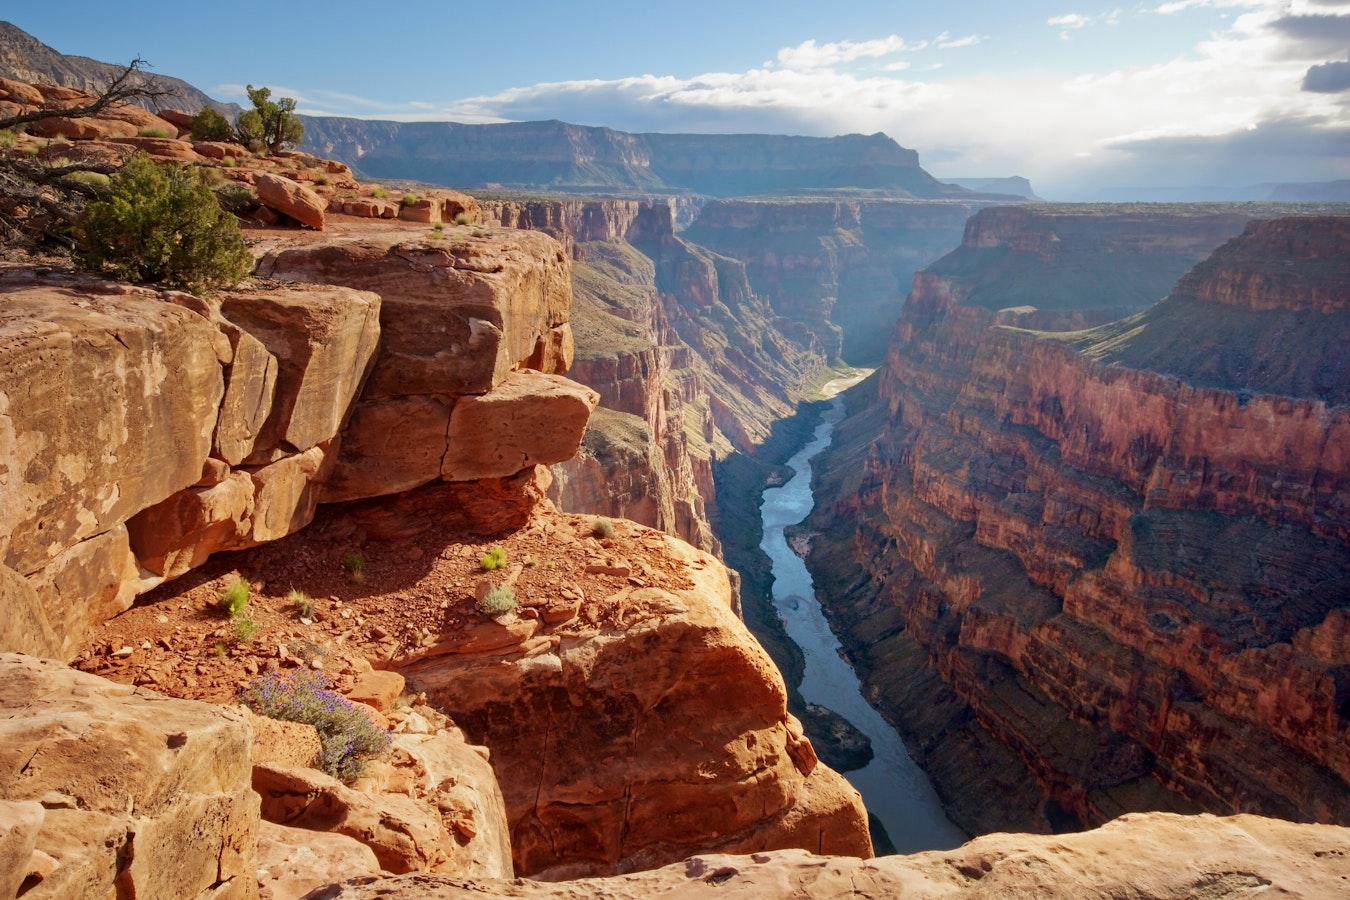 8 Facts About the Grand Canyon You Never Knew